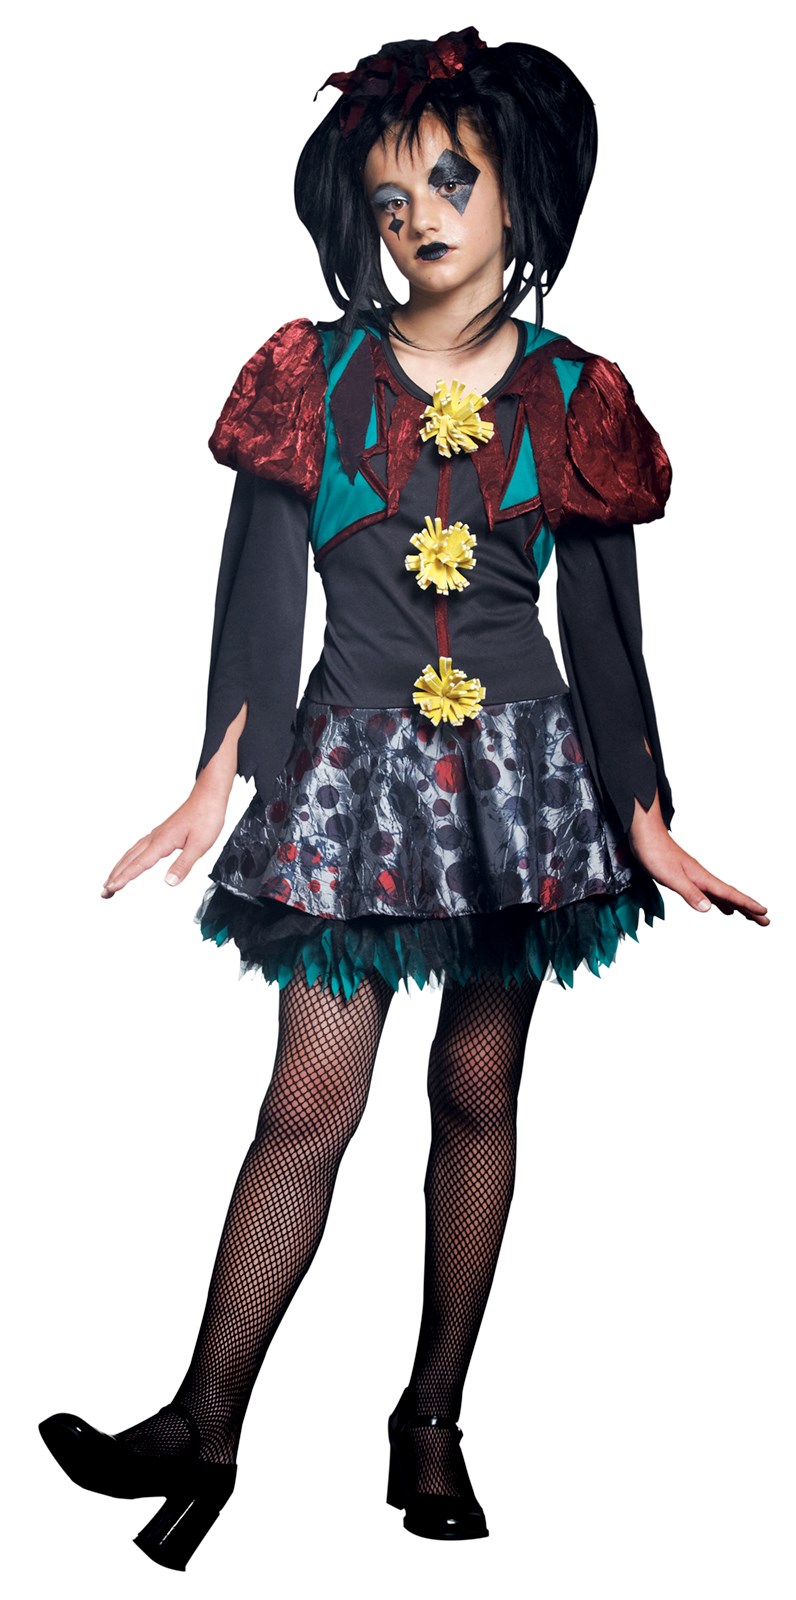 Scary Merry Child Costume - Large (12/14)